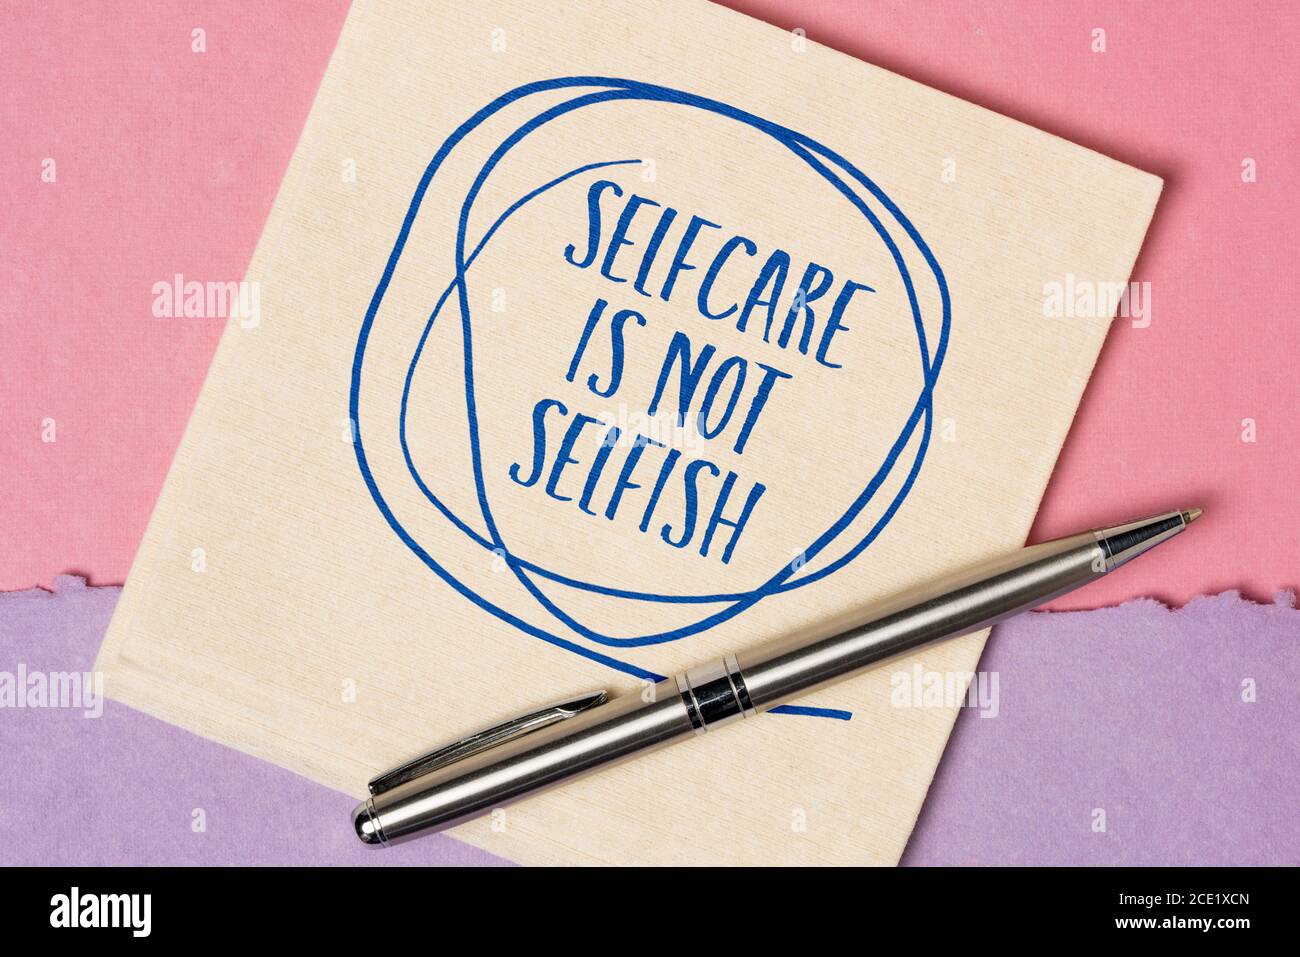 selfcare is not selfish inspirational reminder - handwriting and doodle on a napkin, body positive, mental health slogan Stock Photo